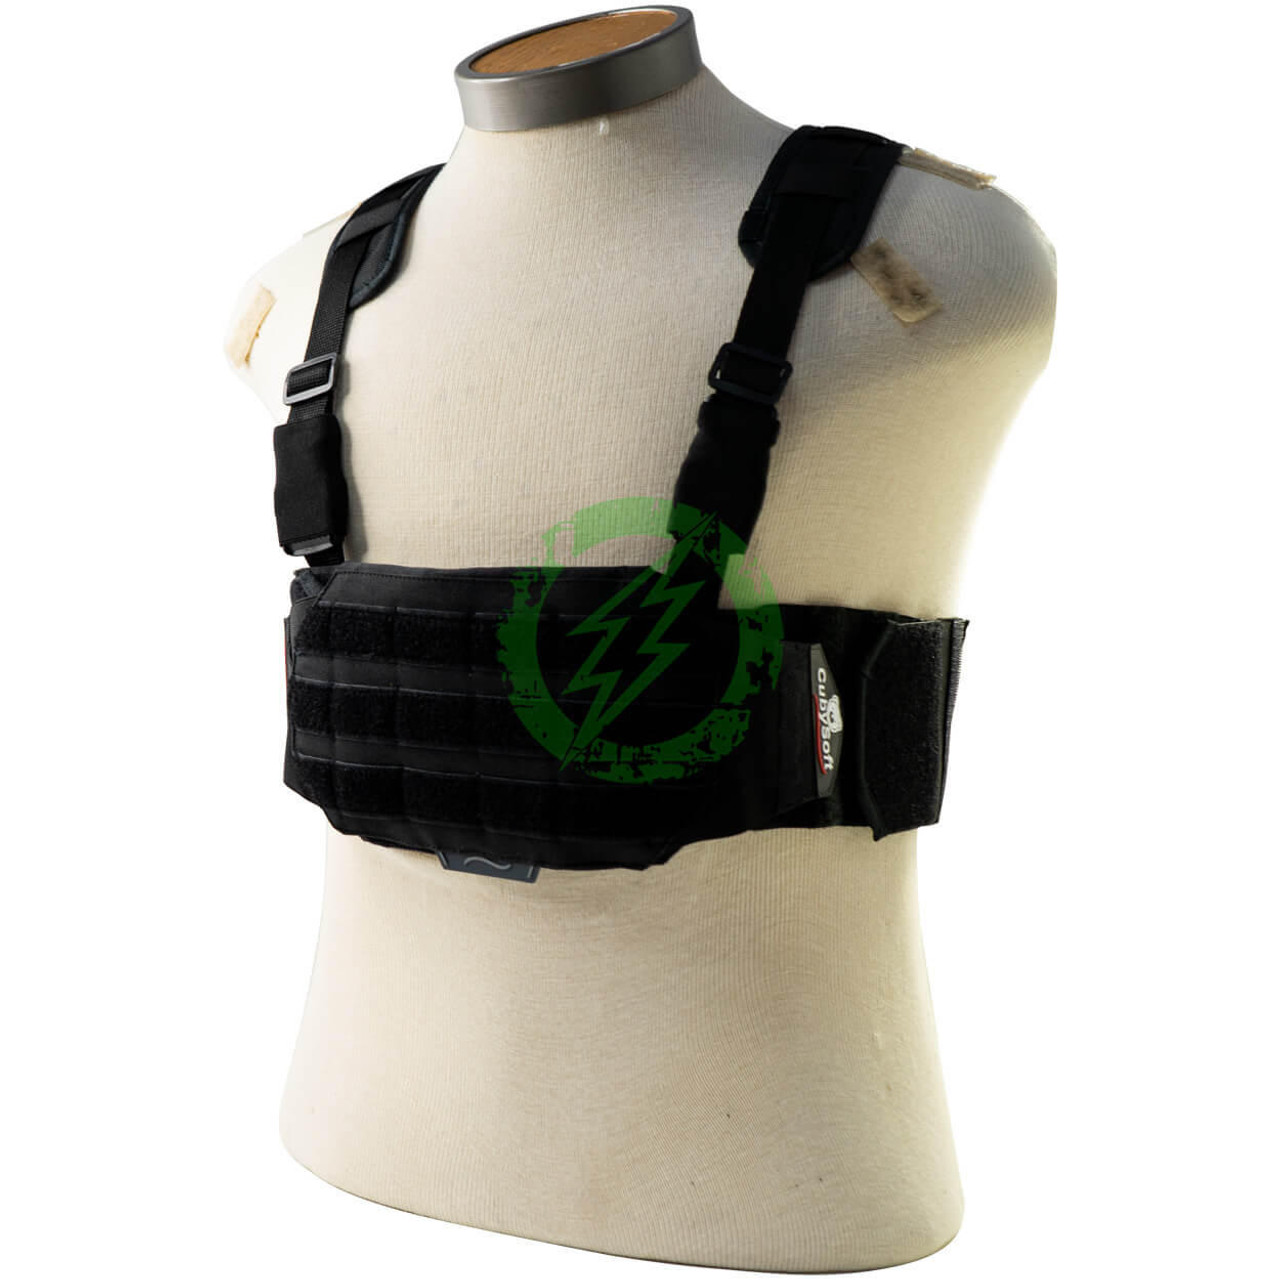  CubySoft Typhoon Chest Rig TVP Cyclone Chest Rig | Black 